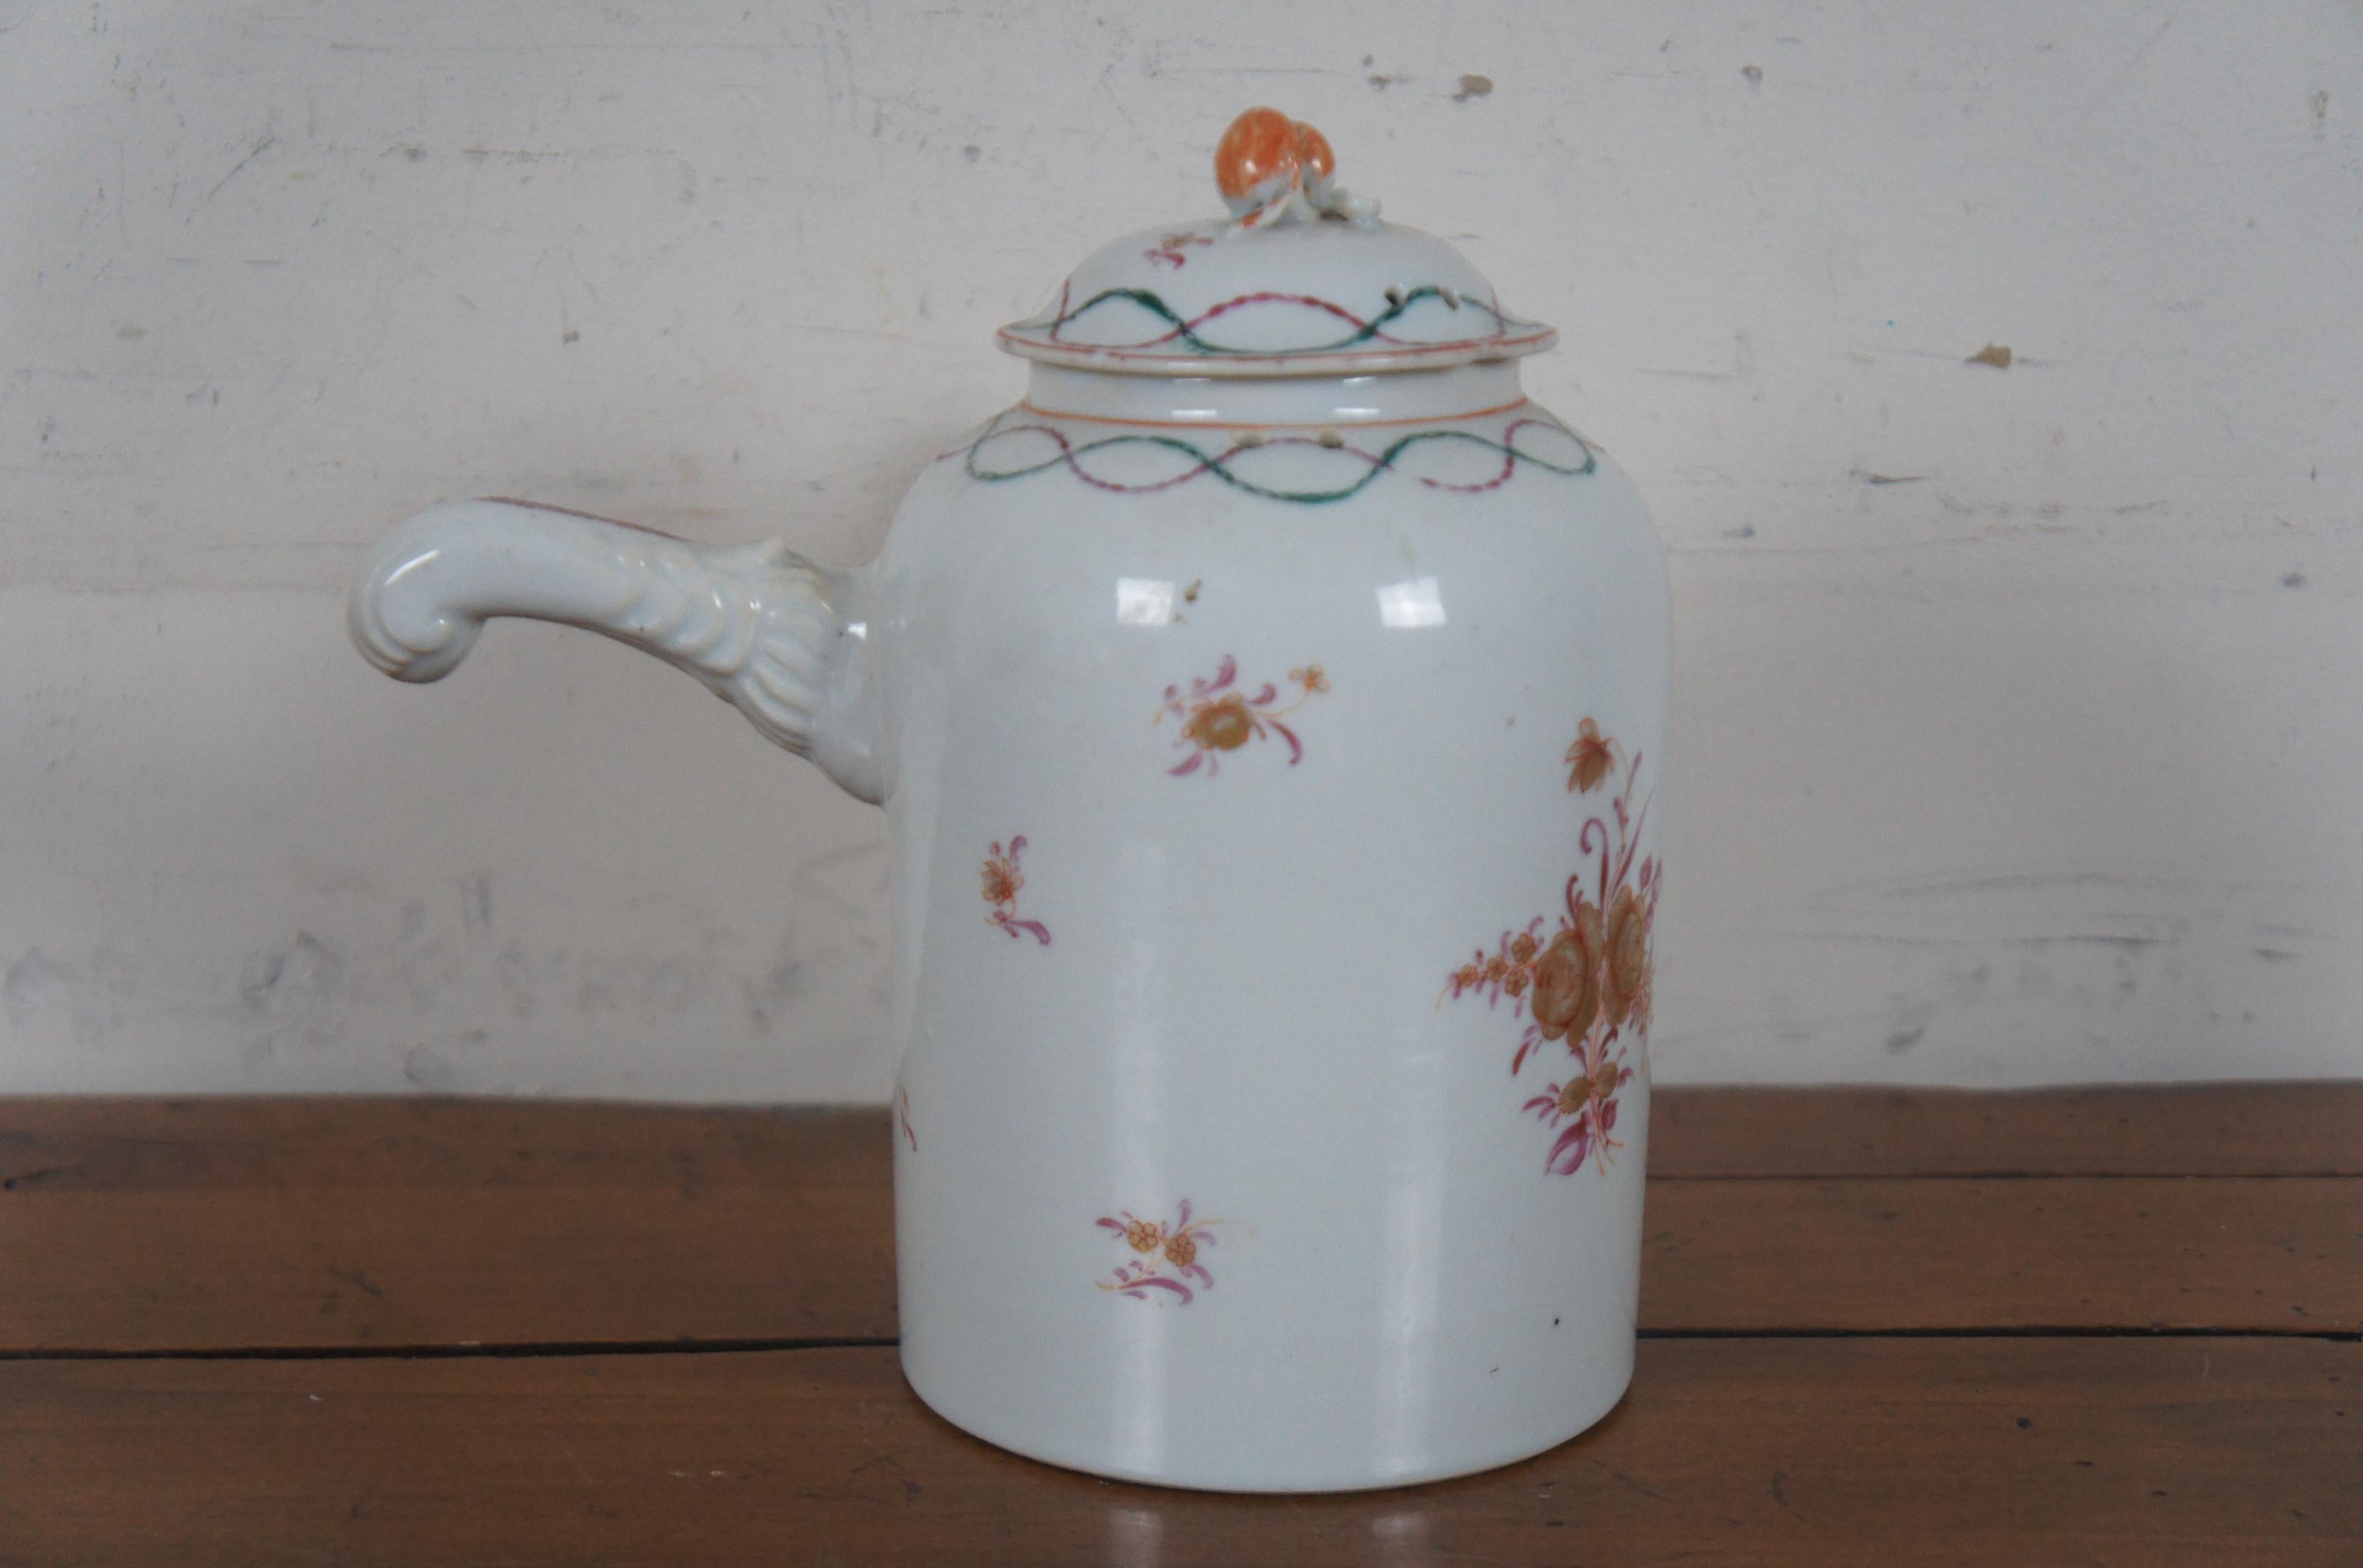 Antique 18th Century Chinese Export Qianlong Porcelain Chocolate Tea Pot In Good Condition For Sale In Dayton, OH